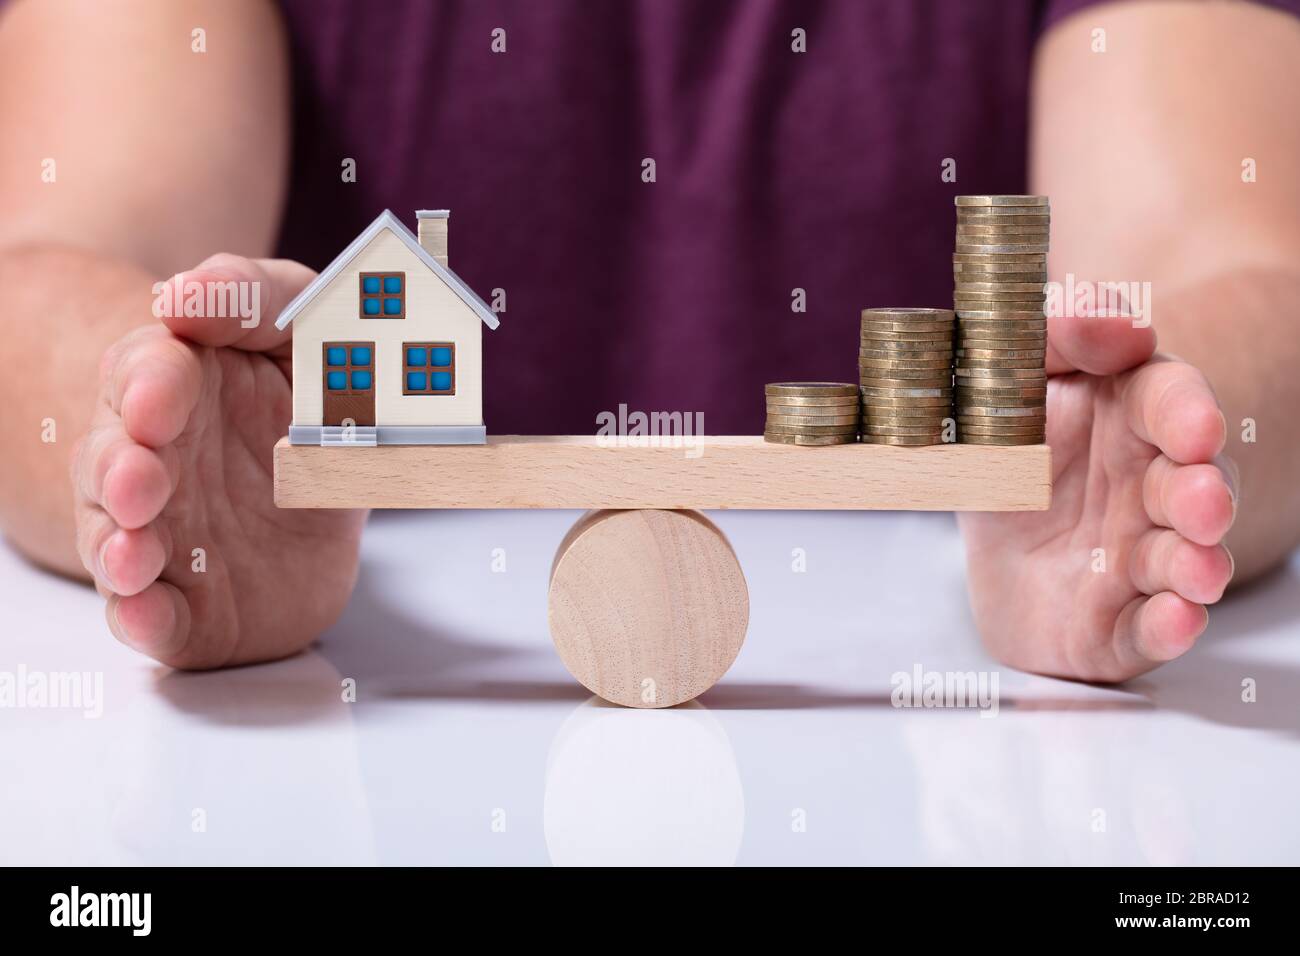 A Person's Hand Protecting Balance Between House Model And Money Coins On A Wooden Seesaw Stock Photo